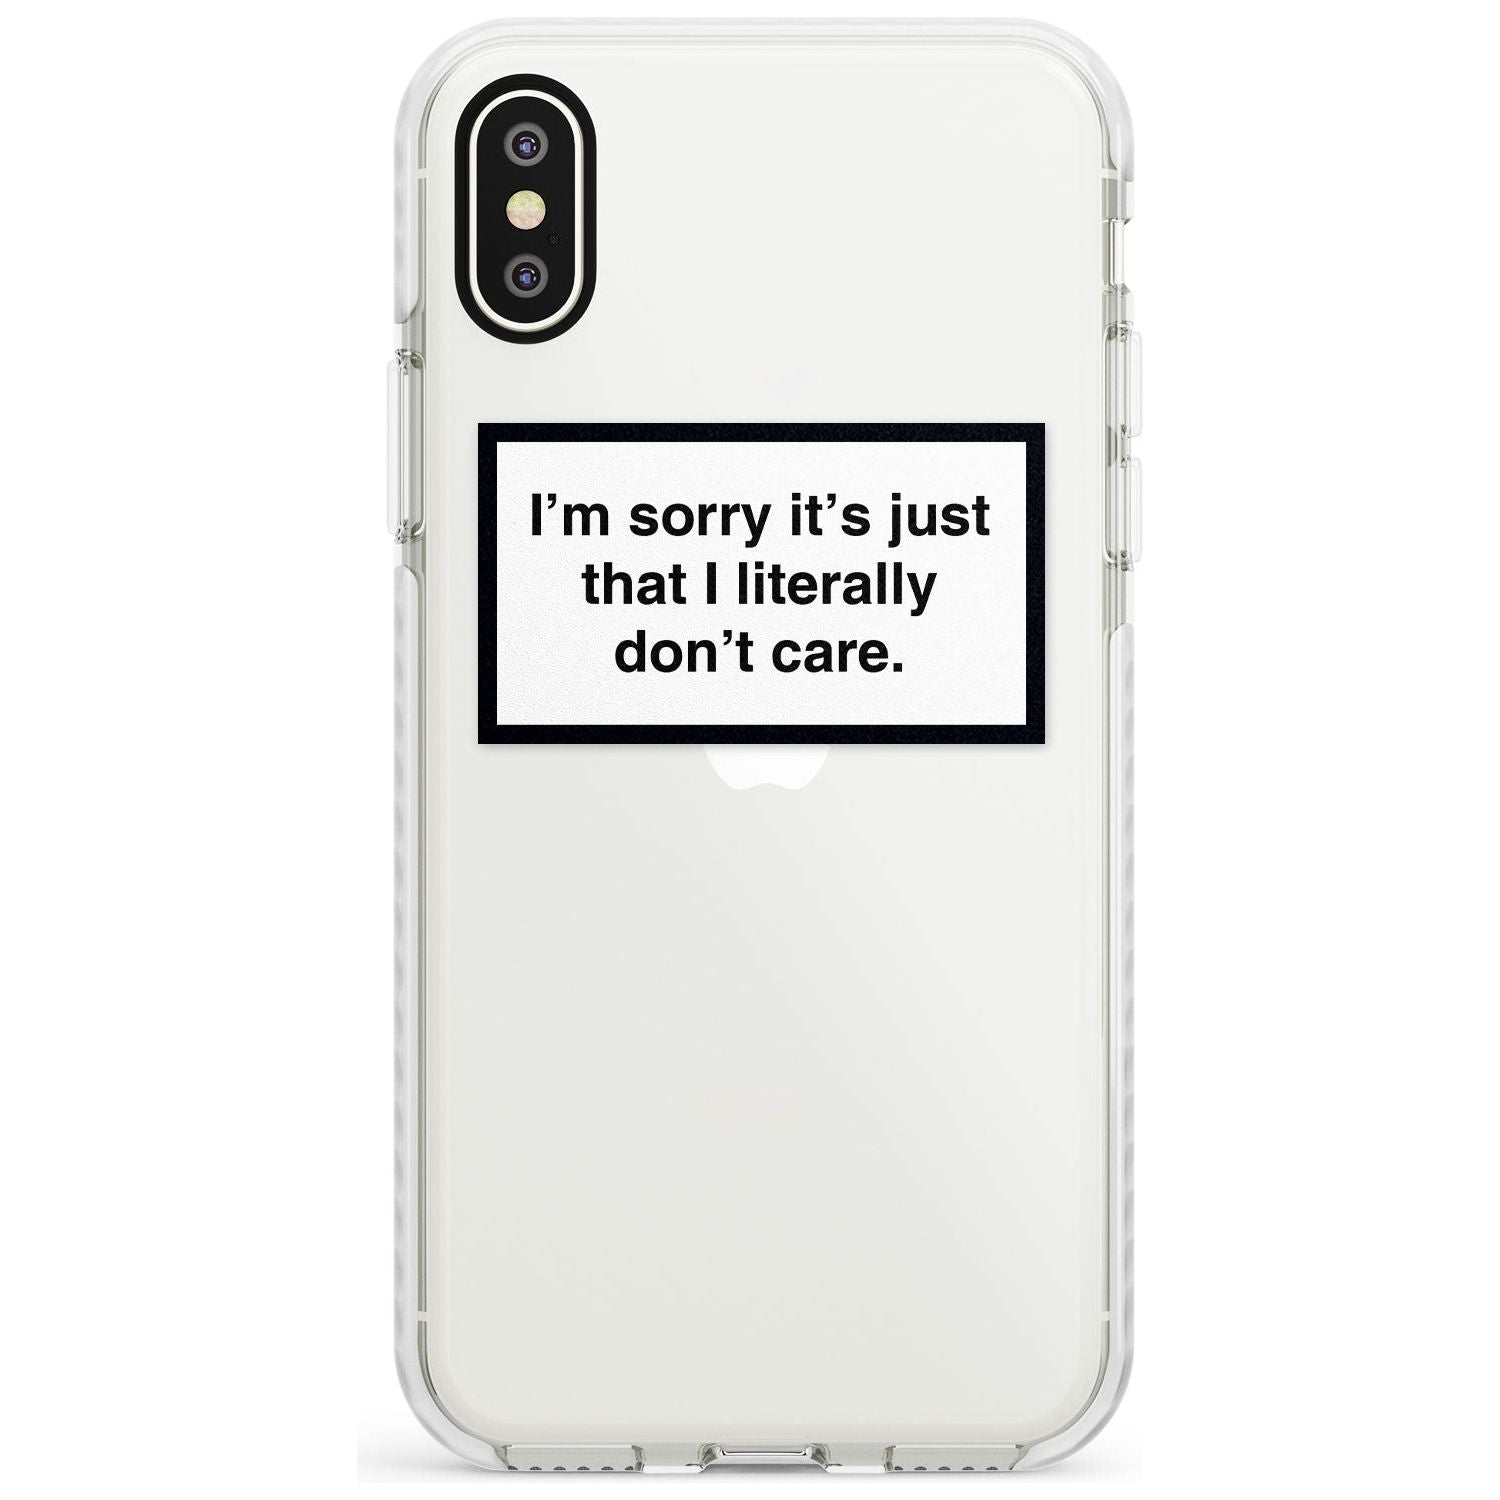 I'm sorry it's just that I literally don't care Slim TPU Phone Case Warehouse X XS Max XR